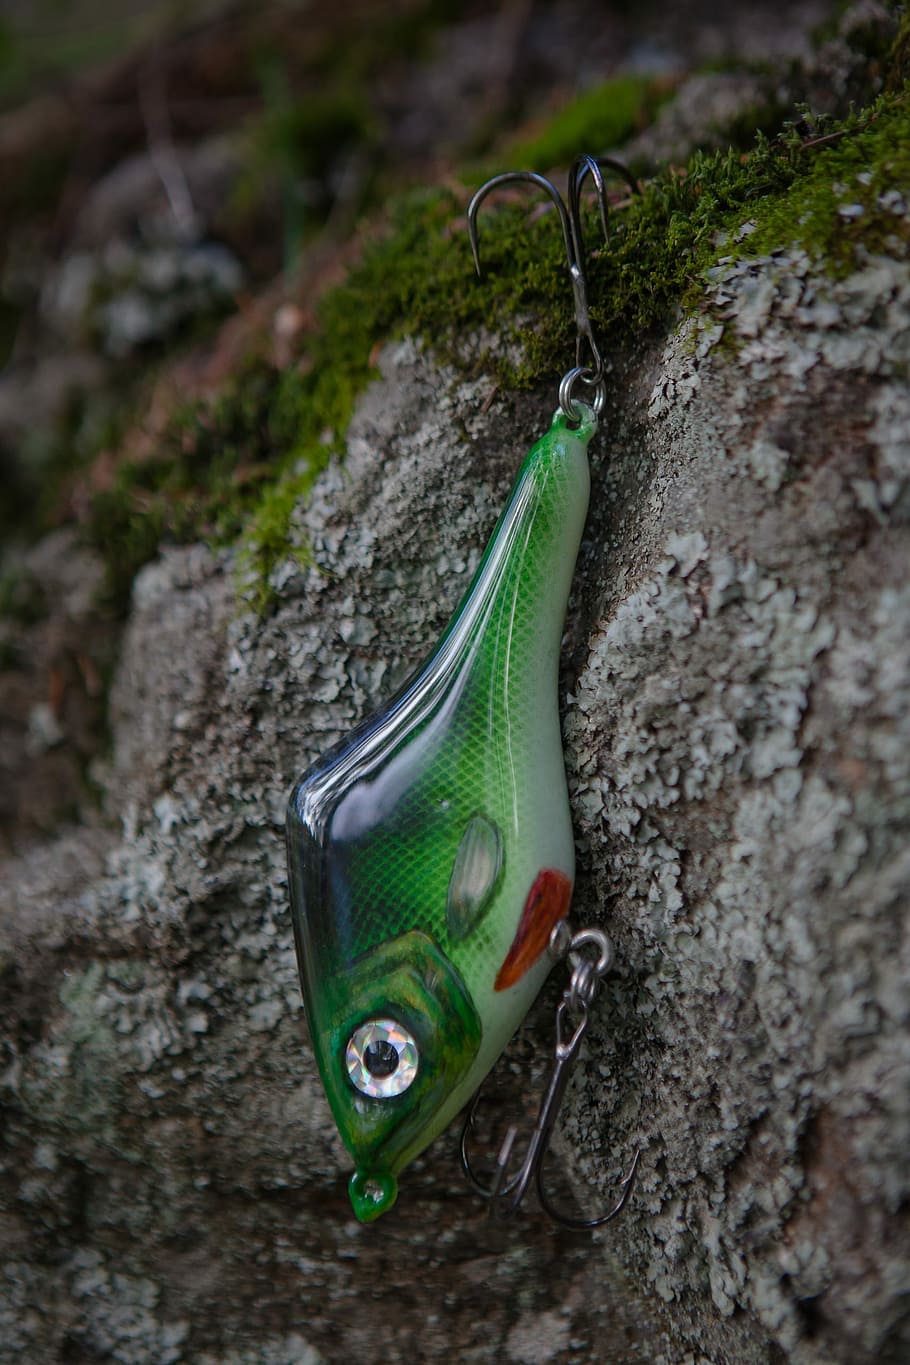 Pike, Features, Fishing Lures, fishing, outdoors, day, close-up, green color, hanging, plant